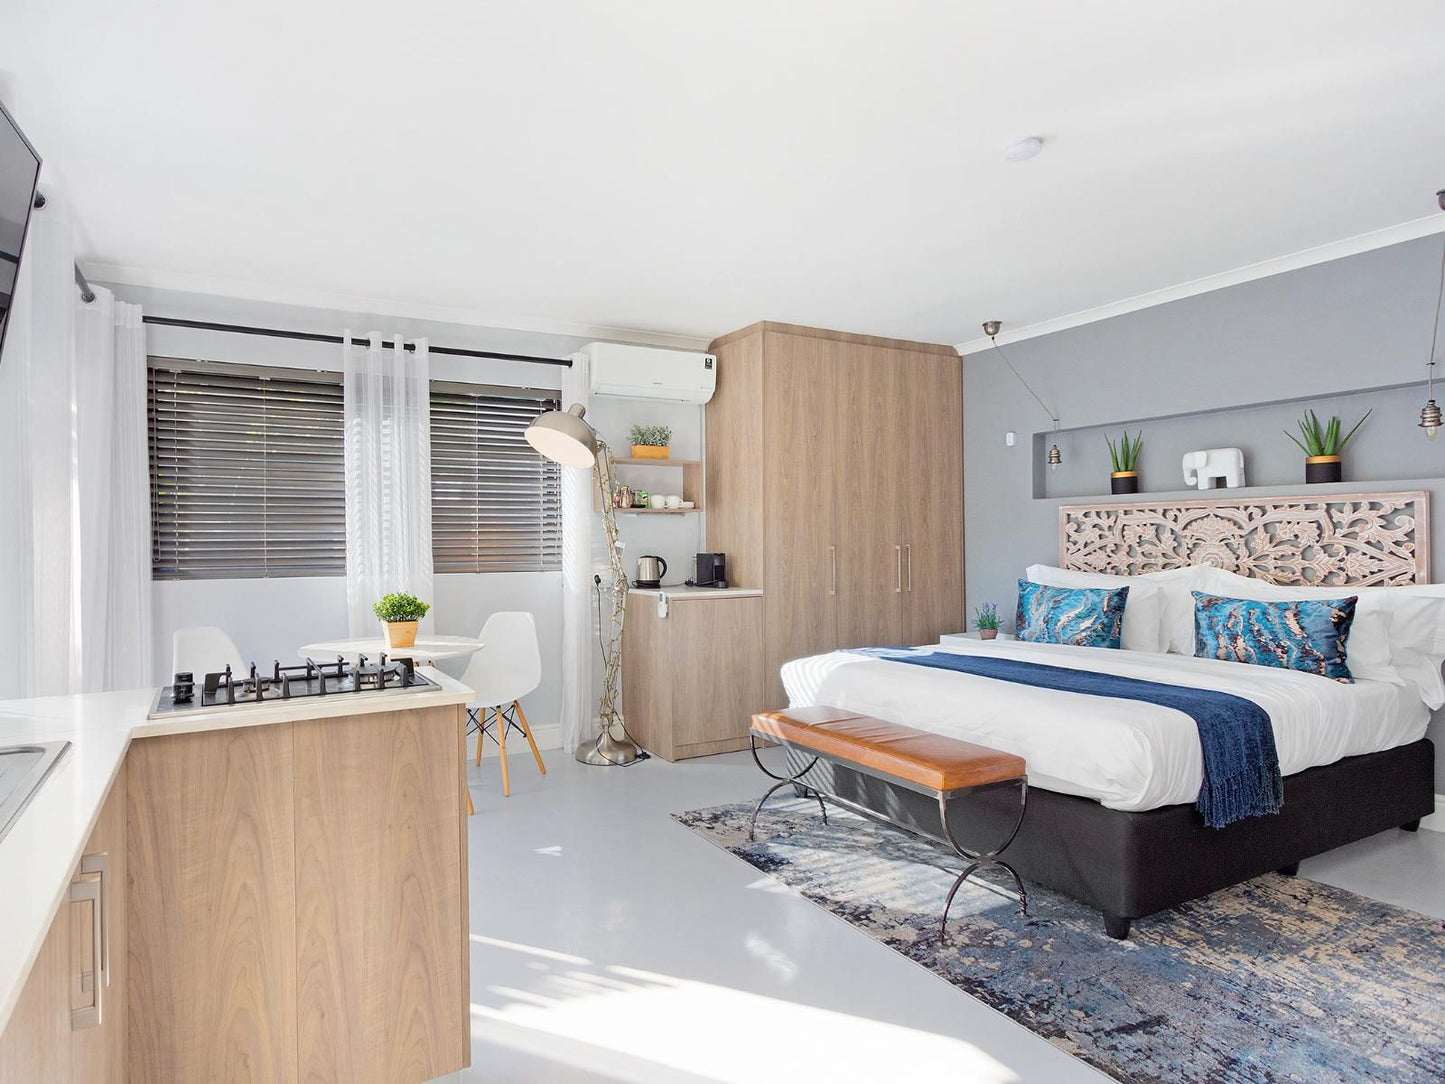 A Studio Apartment In Bloubergsands Blouberg Sands Blouberg Western Cape South Africa Bedroom